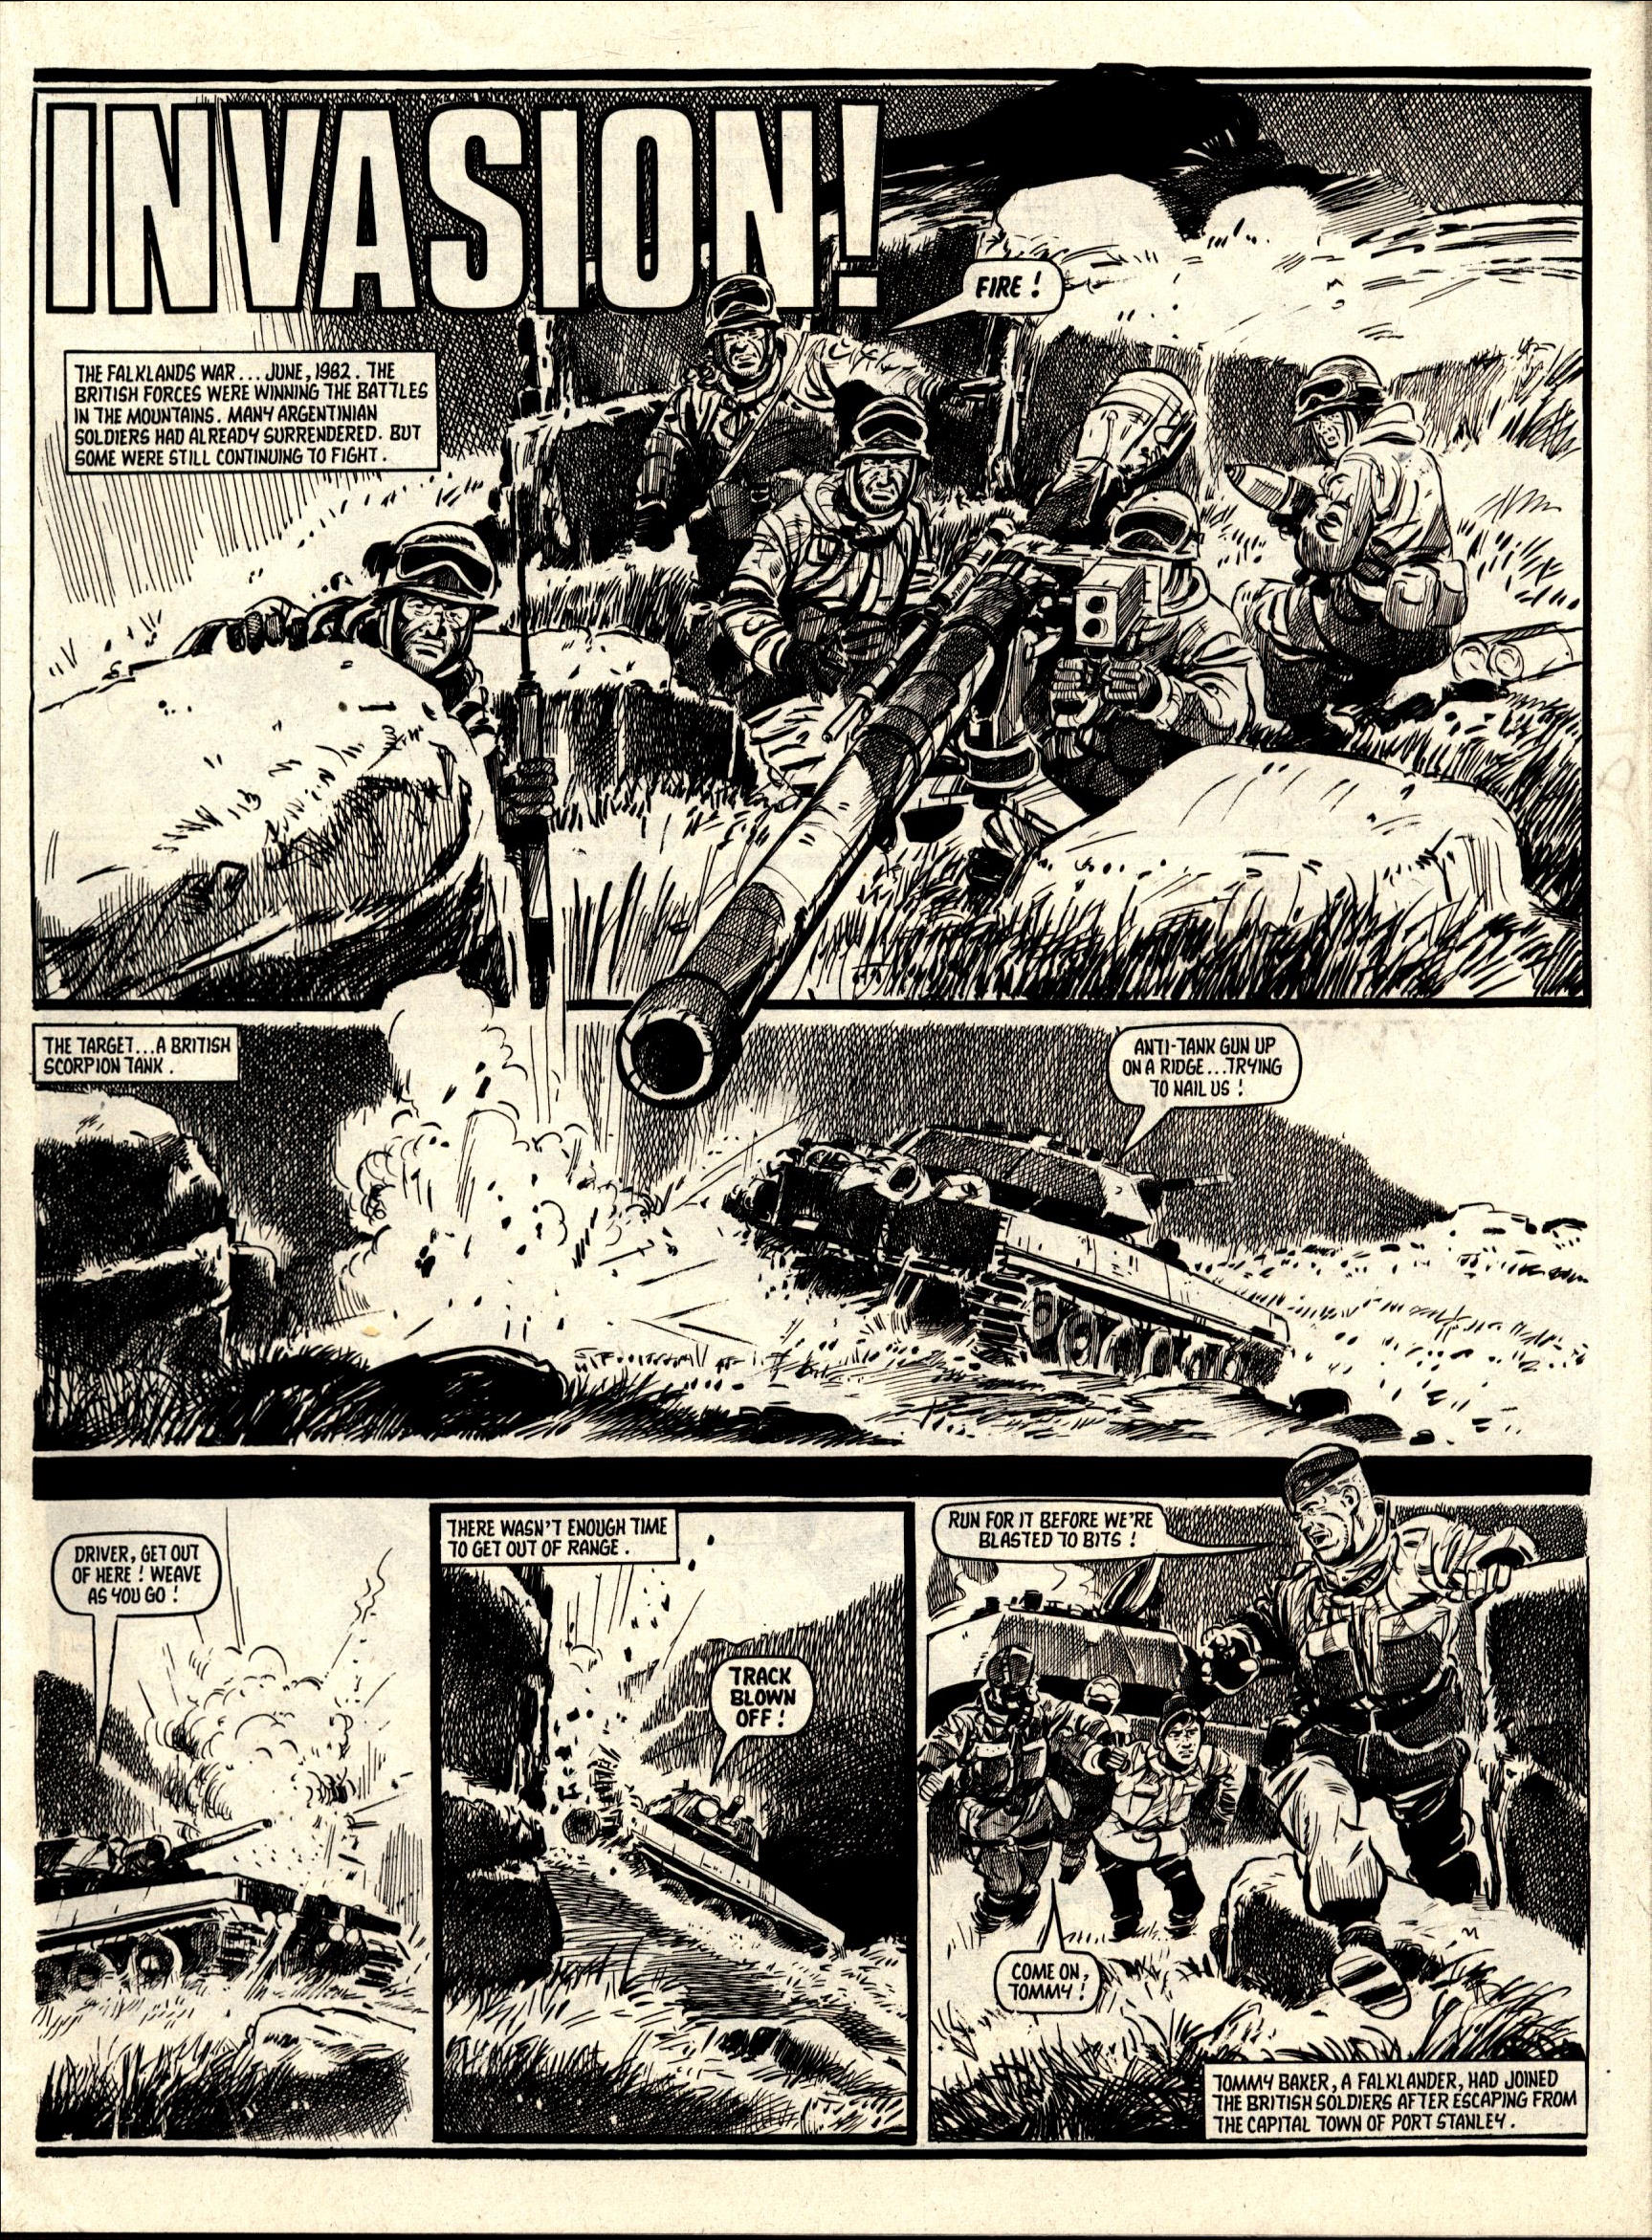 A page from the Falklands War-inspired story "Invasion". published in Battle with Storm Force in August 1987. Story by Story by Terry Magee, art by Jim Watson